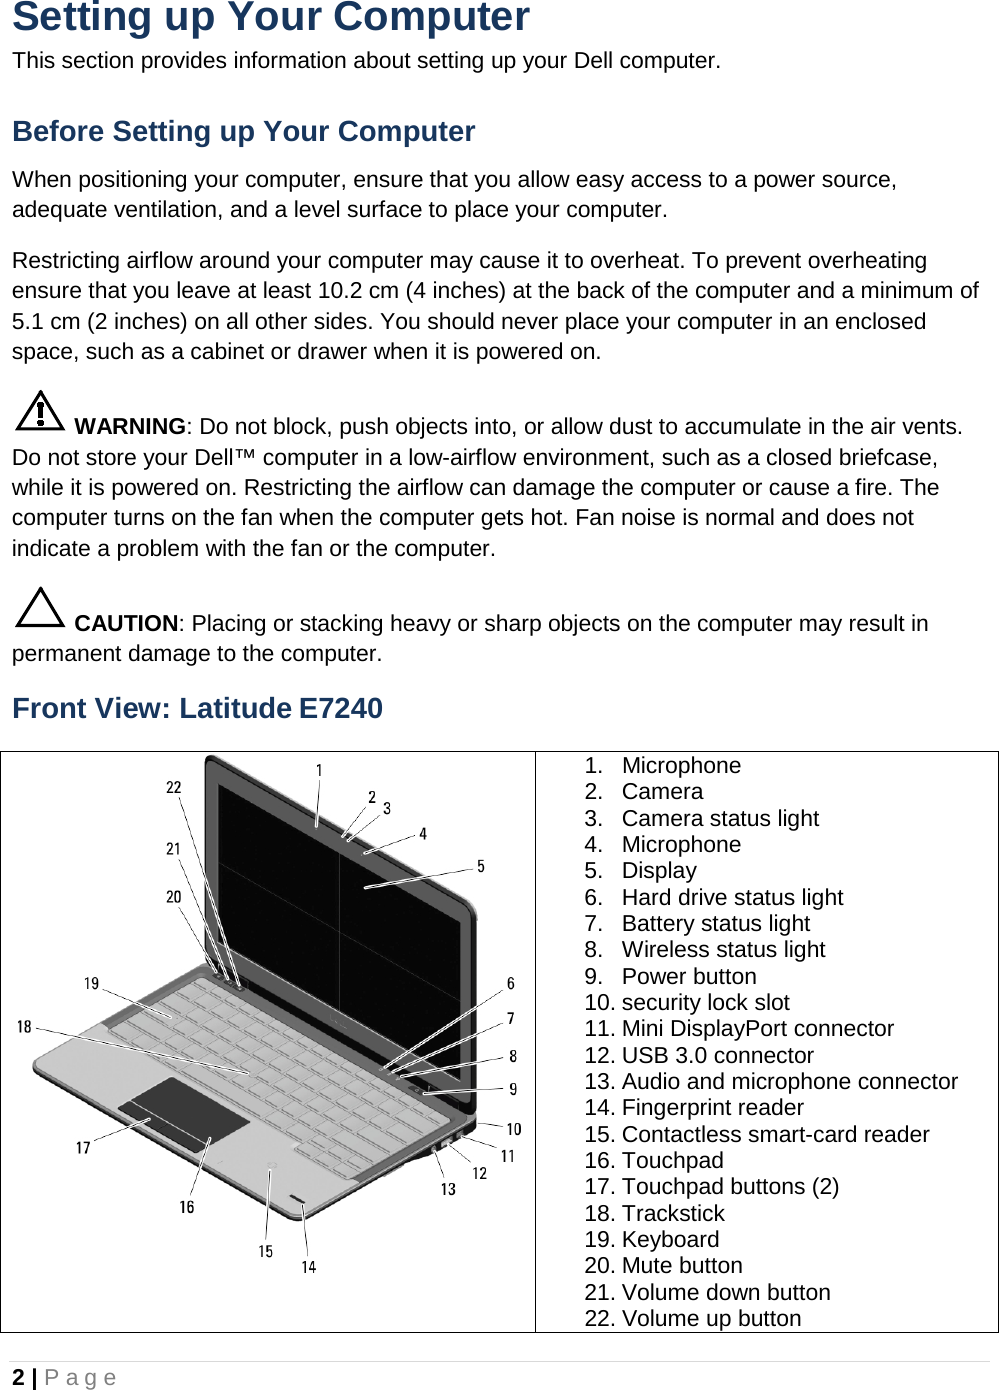 2 | Page  Setting up Your Computer This section provides information about setting up your Dell computer. Before Setting up Your Computer When positioning your computer, ensure that you allow easy access to a power source, adequate ventilation, and a level surface to place your computer. Restricting airflow around your computer may cause it to overheat. To prevent overheating ensure that you leave at least 10.2 cm (4 inches) at the back of the computer and a minimum of 5.1 cm (2 inches) on all other sides. You should never place your computer in an enclosed space, such as a cabinet or drawer when it is powered on.  WARNING: Do not block, push objects into, or allow dust to accumulate in the air vents. Do not store your Dell™ computer in a low-airflow environment, such as a closed briefcase, while it is powered on. Restricting the airflow can damage the computer or cause a fire. The computer turns on the fan when the computer gets hot. Fan noise is normal and does not indicate a problem with the fan or the computer.  CAUTION: Placing or stacking heavy or sharp objects on the computer may result in permanent damage to the computer. Front View: Latitude E7240  1. Microphone 2. Camera 3. Camera status light 4. Microphone 5. Display 6. Hard drive status light 7. Battery status light 8. Wireless status light 9. Power button 10. security lock slot 11. Mini DisplayPort connector 12. USB 3.0 connector 13. Audio and microphone connector 14. Fingerprint reader 15. Contactless smart-card reader 16. Touchpad 17. Touchpad buttons (2) 18. Trackstick 19. Keyboard 20. Mute button 21. Volume down button 22. Volume up button 